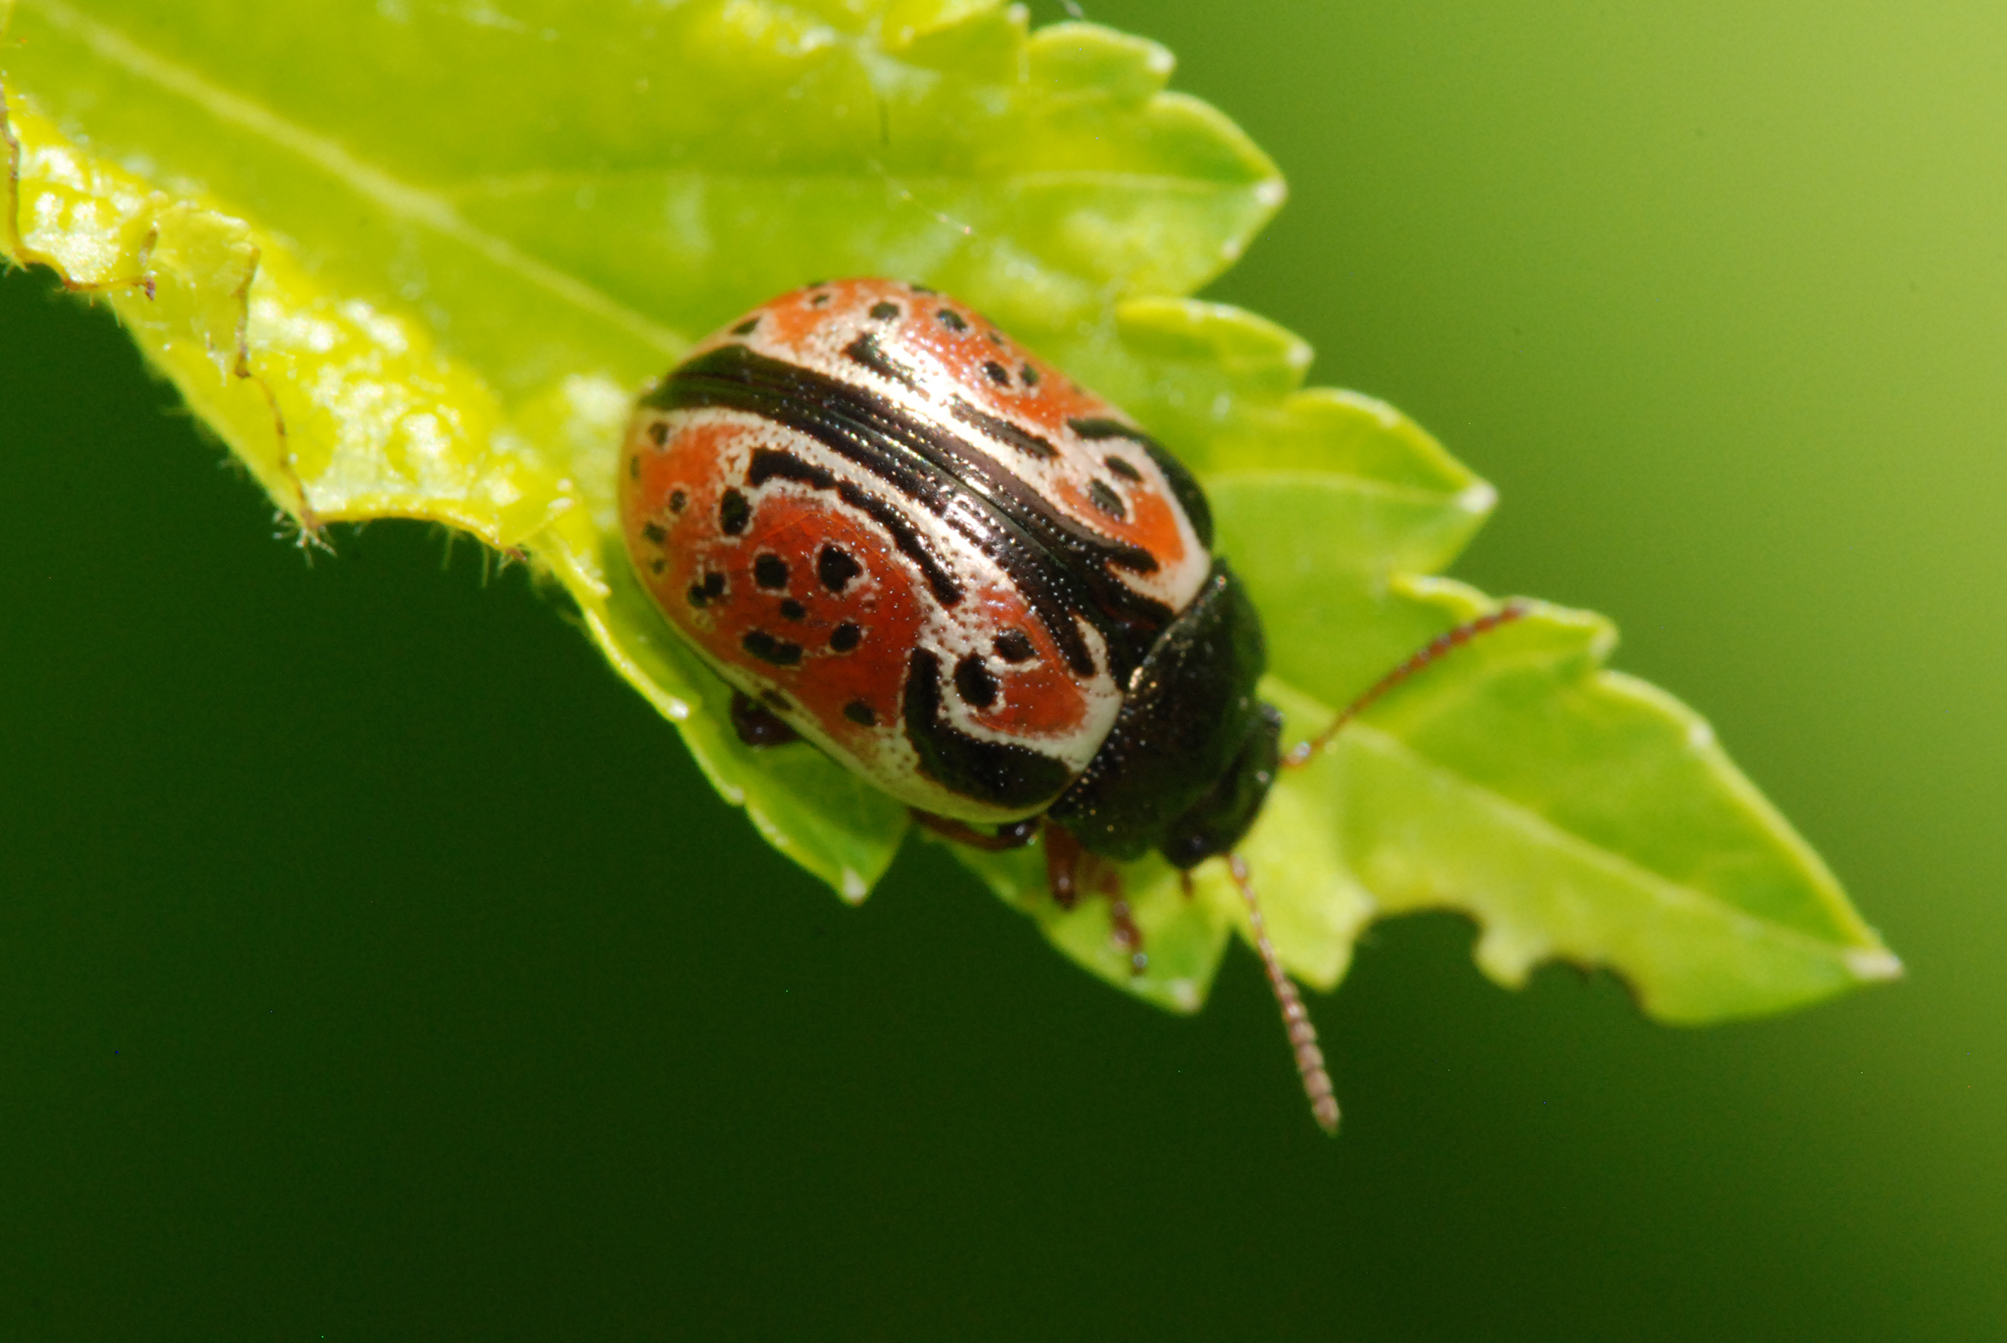 small red beetle with black spots and a black head with antennas on a leaf